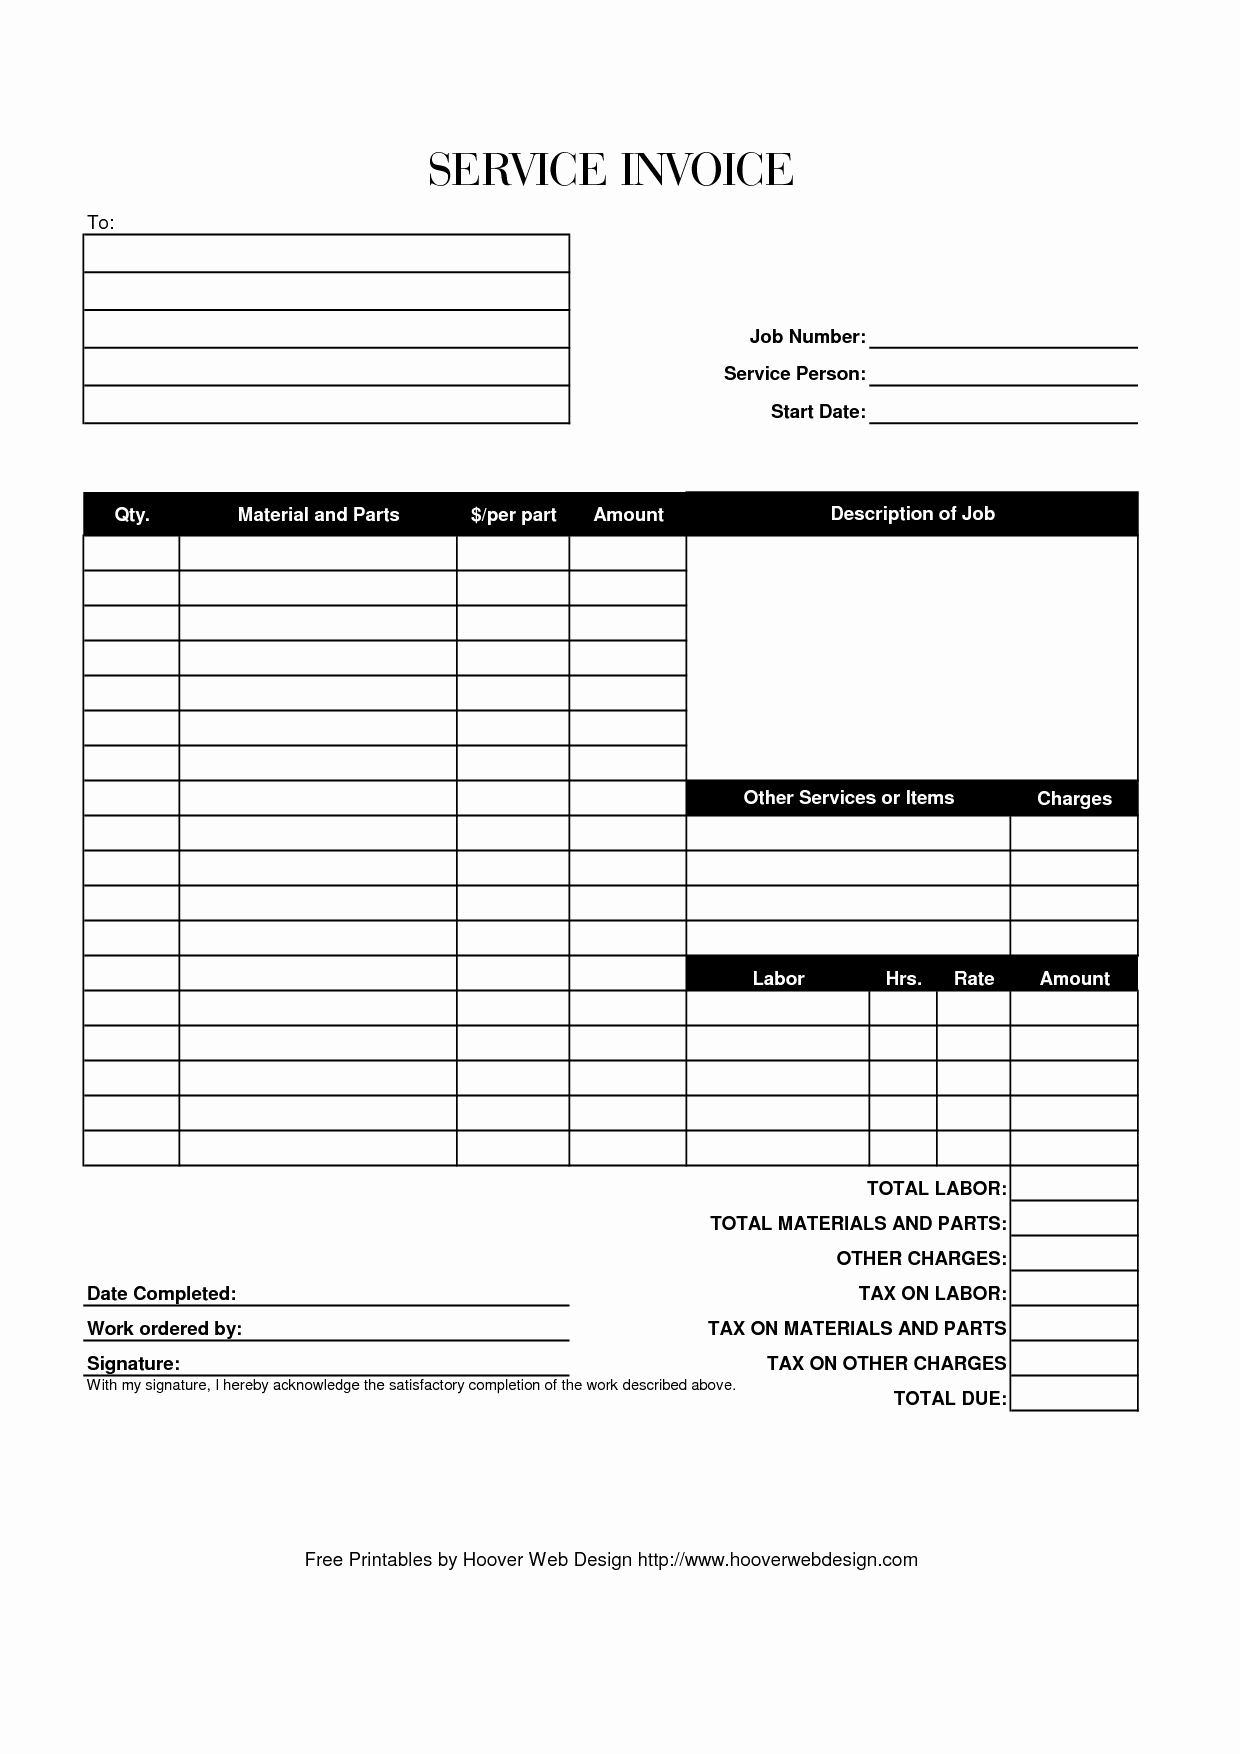 Service Invoice Template Pdf Fresh Hoover Receipts